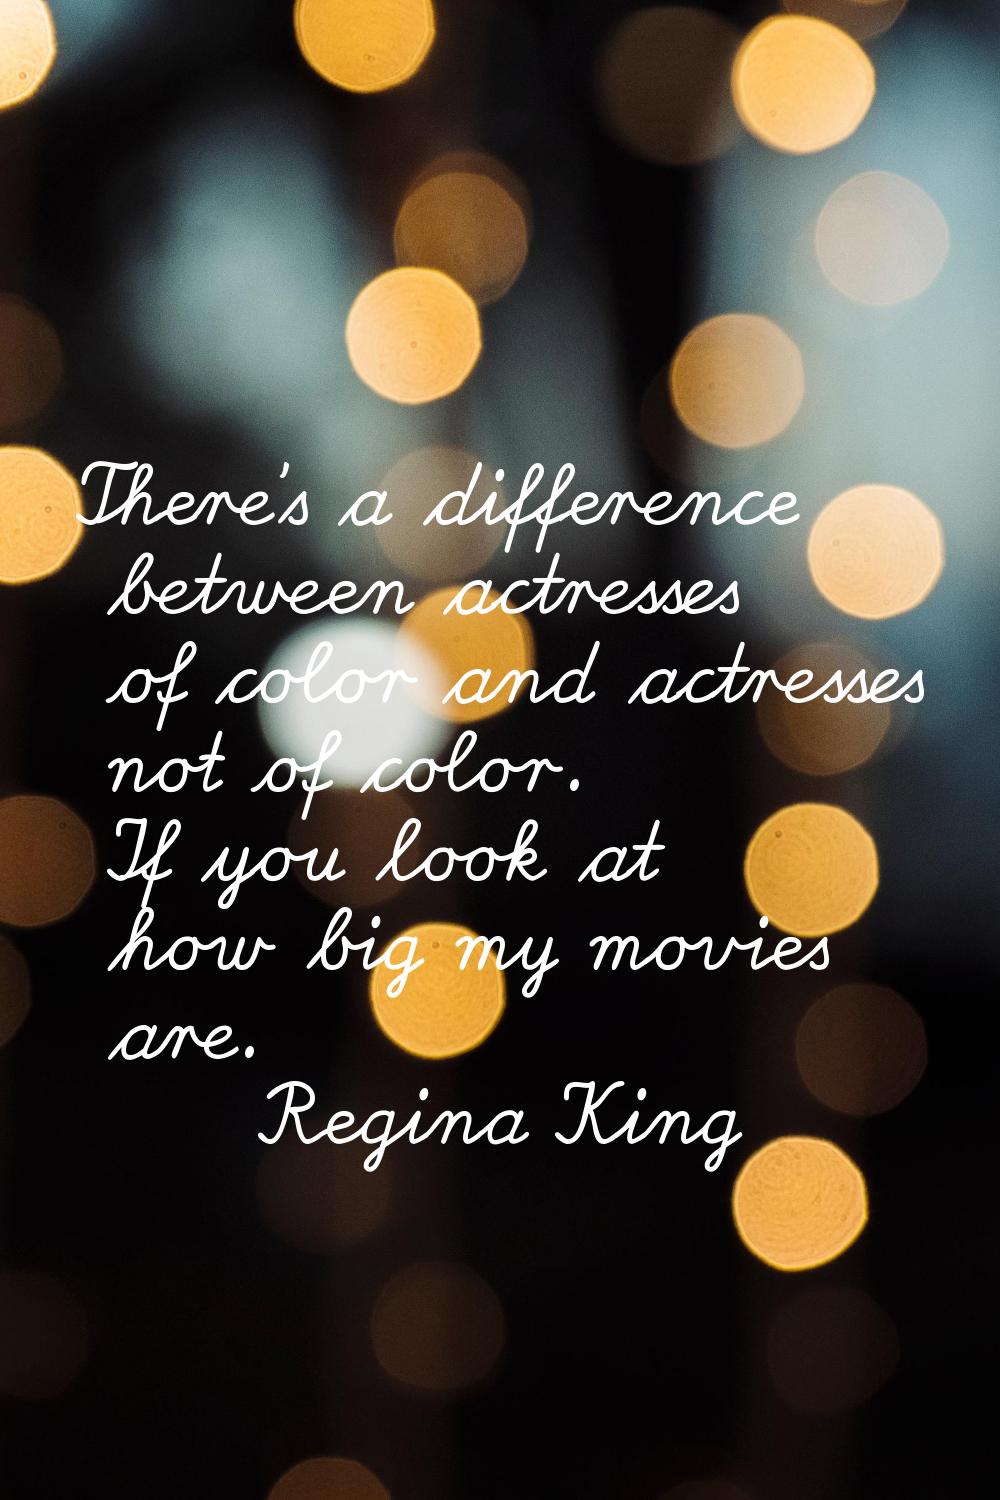 There's a difference between actresses of color and actresses not of color. If you look at how big 